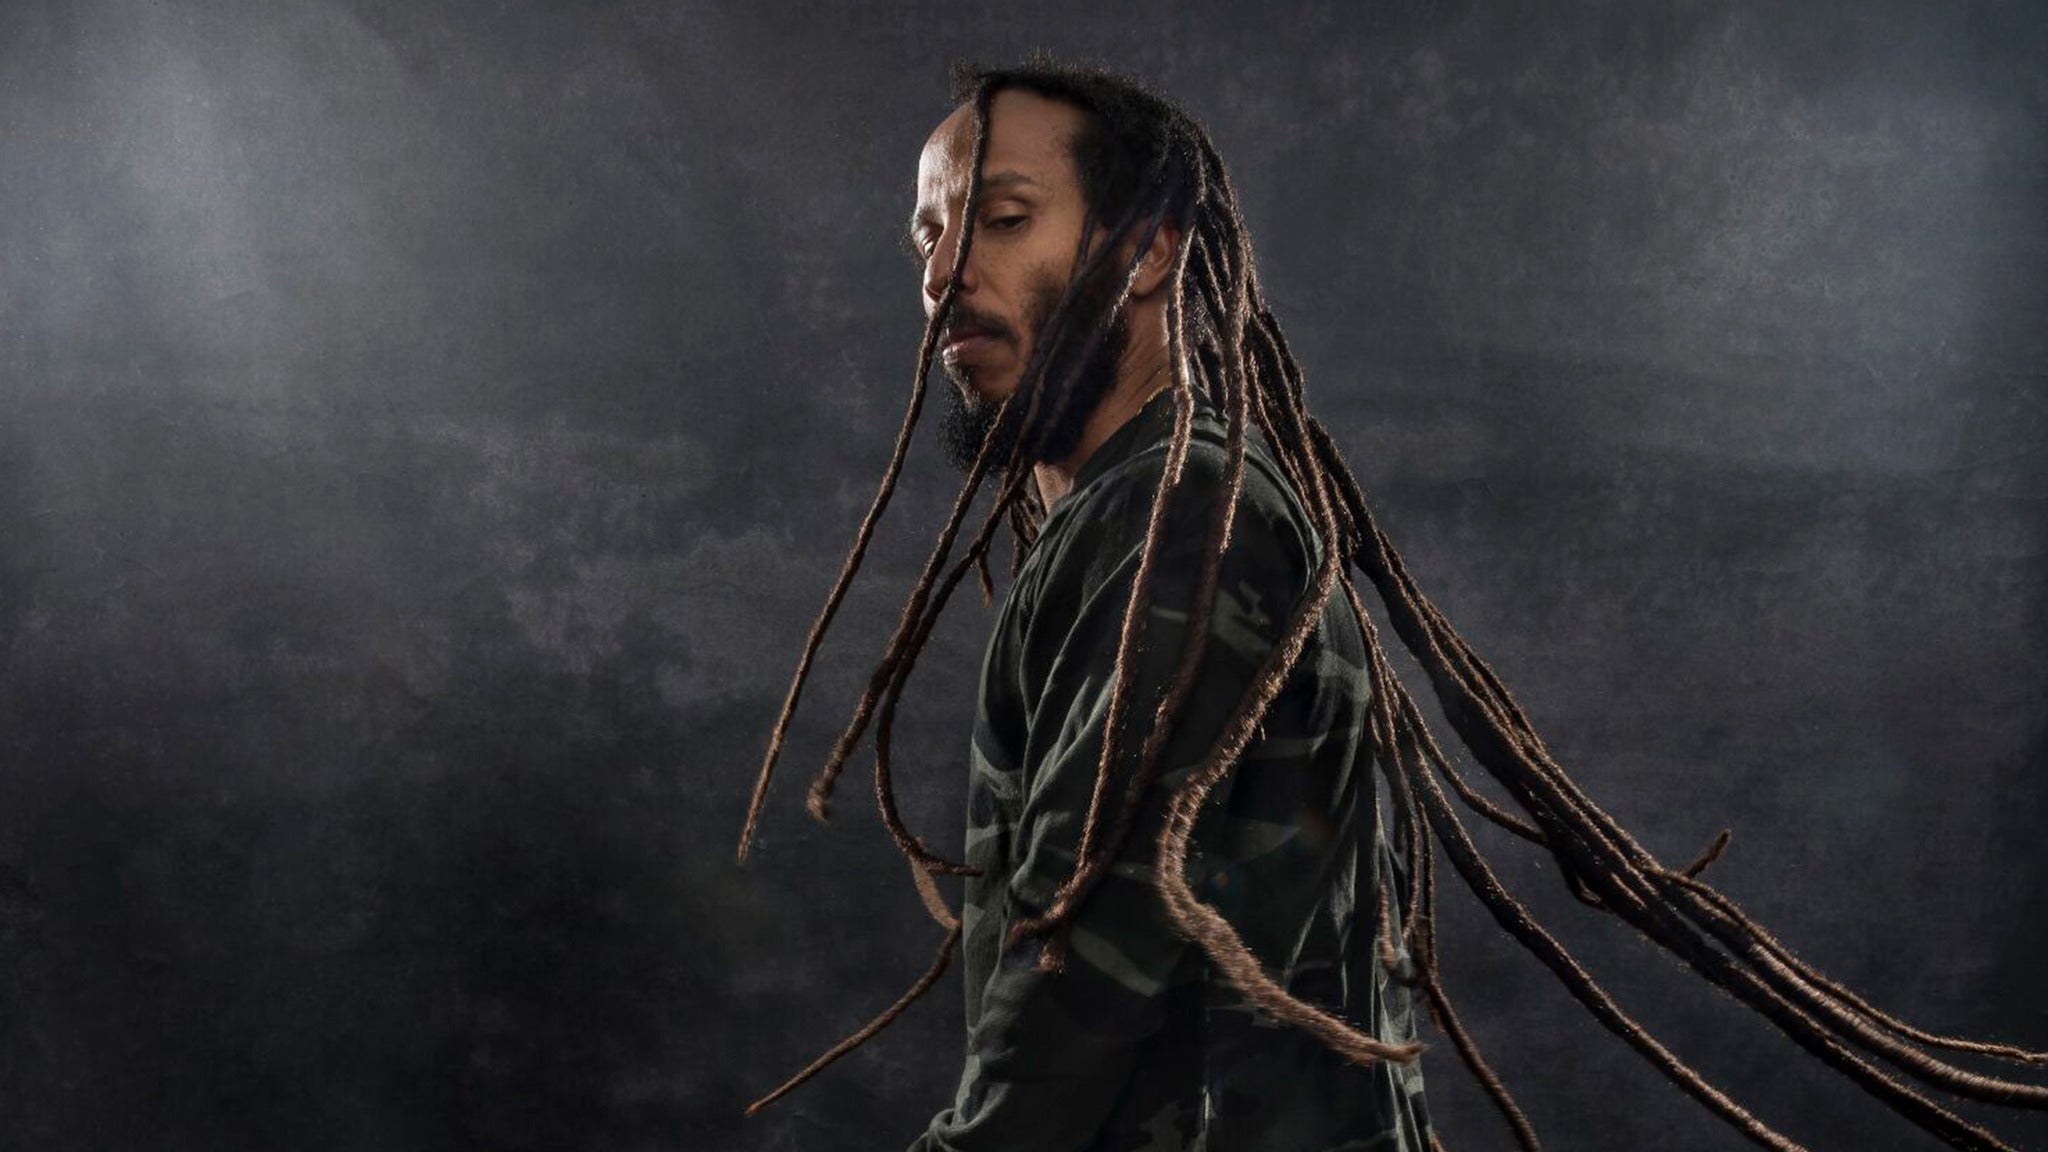 Ziggy Marley – A Tribute To His Father